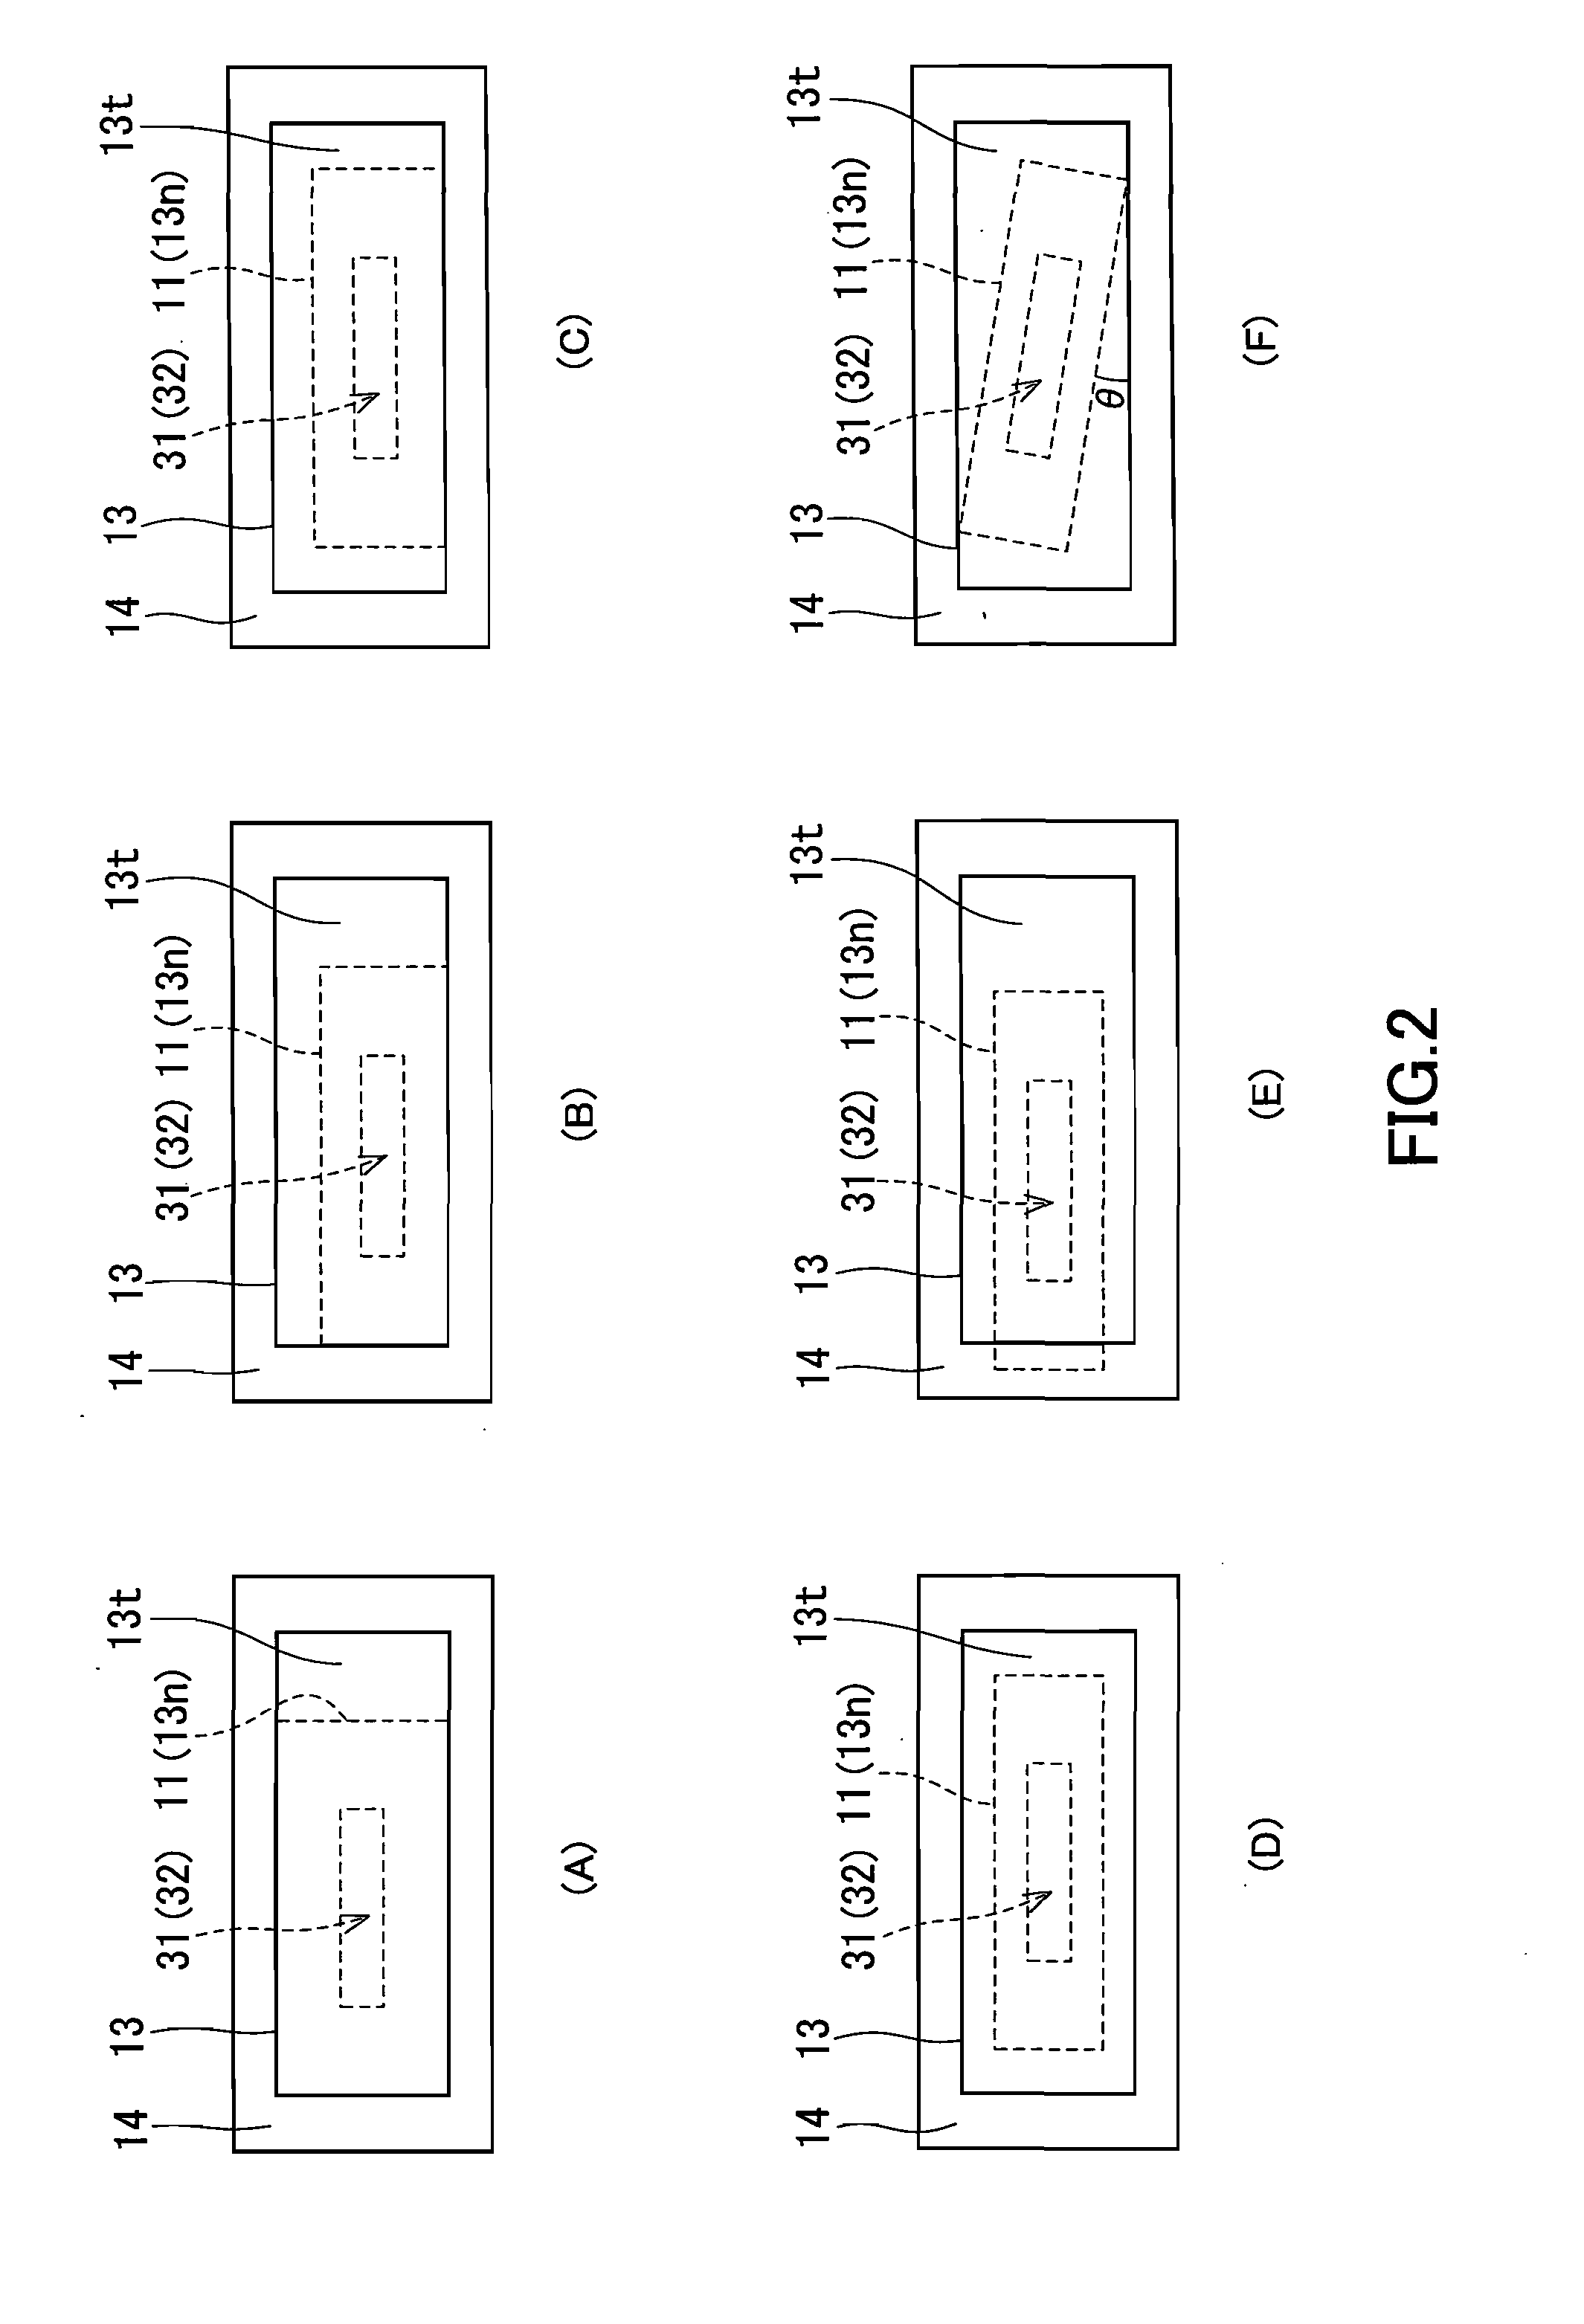 Water-proof sound-transmitting member and method for producing same, and supported water-proof sound-transmitting member